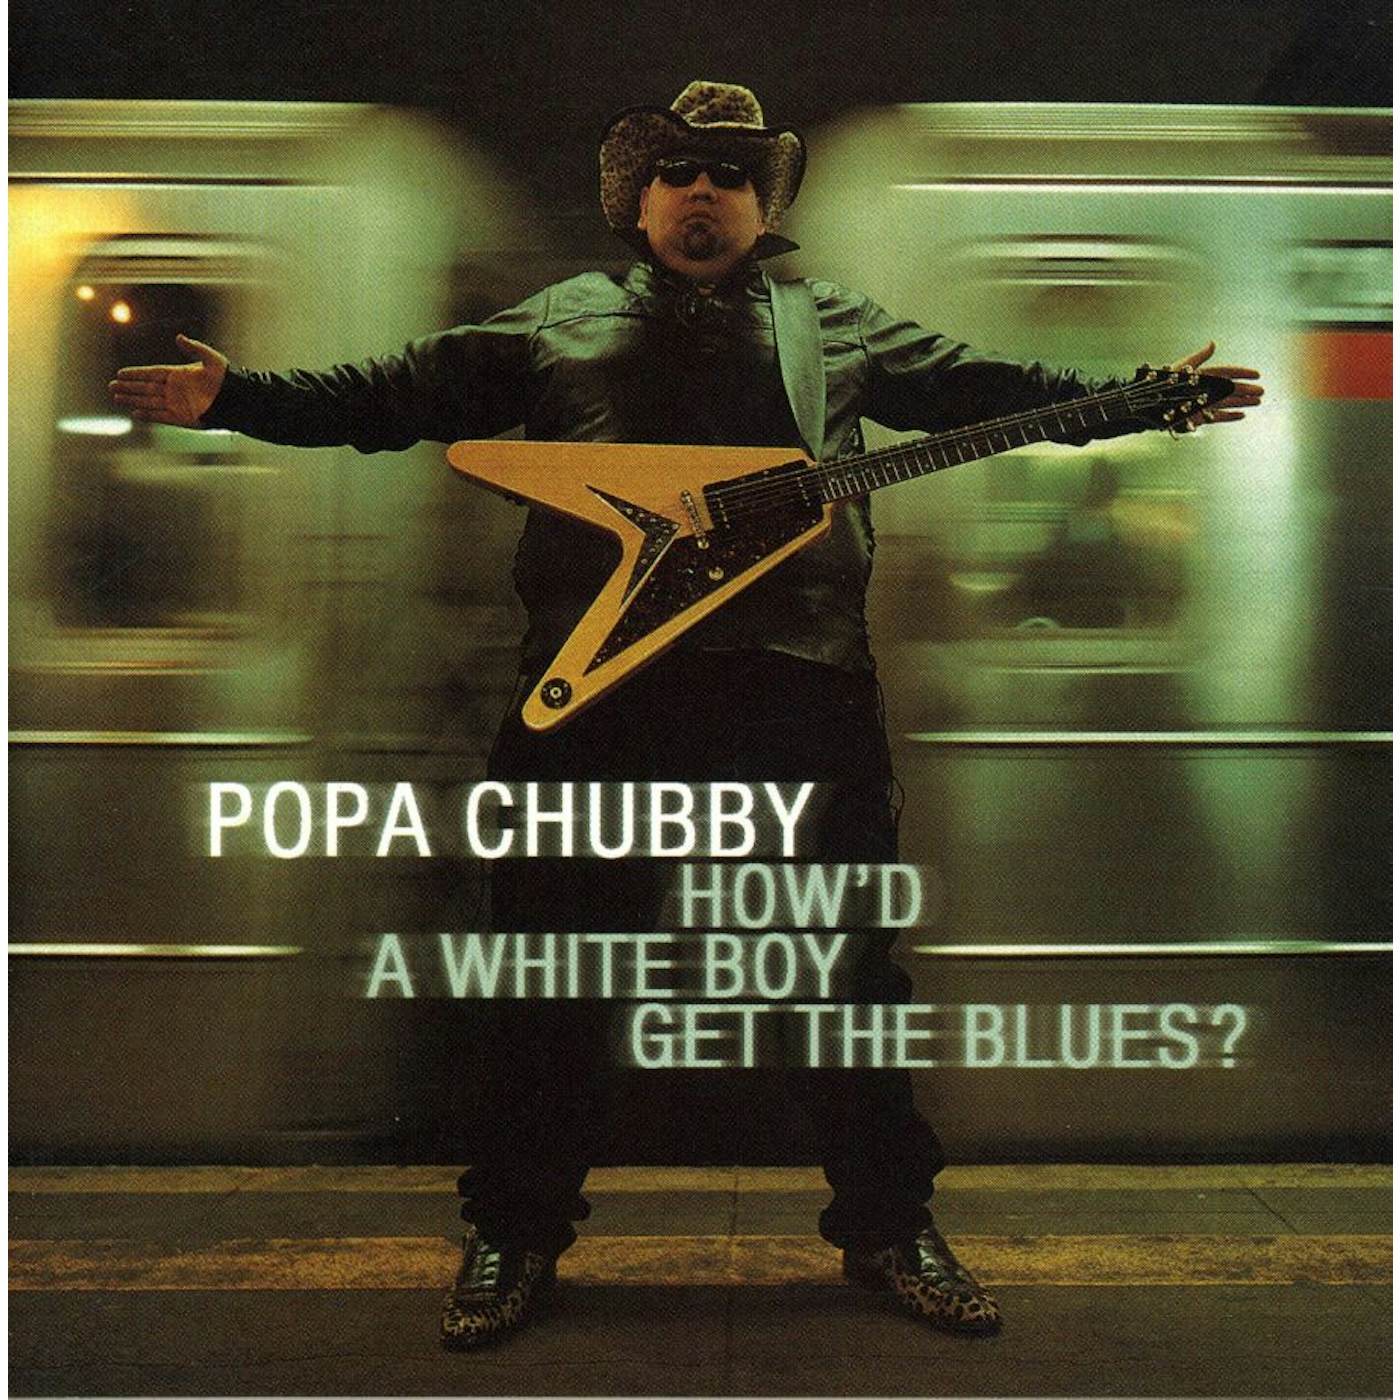 Popa Chubby HOW'D A WHITE BOY GET THE BLUES CD